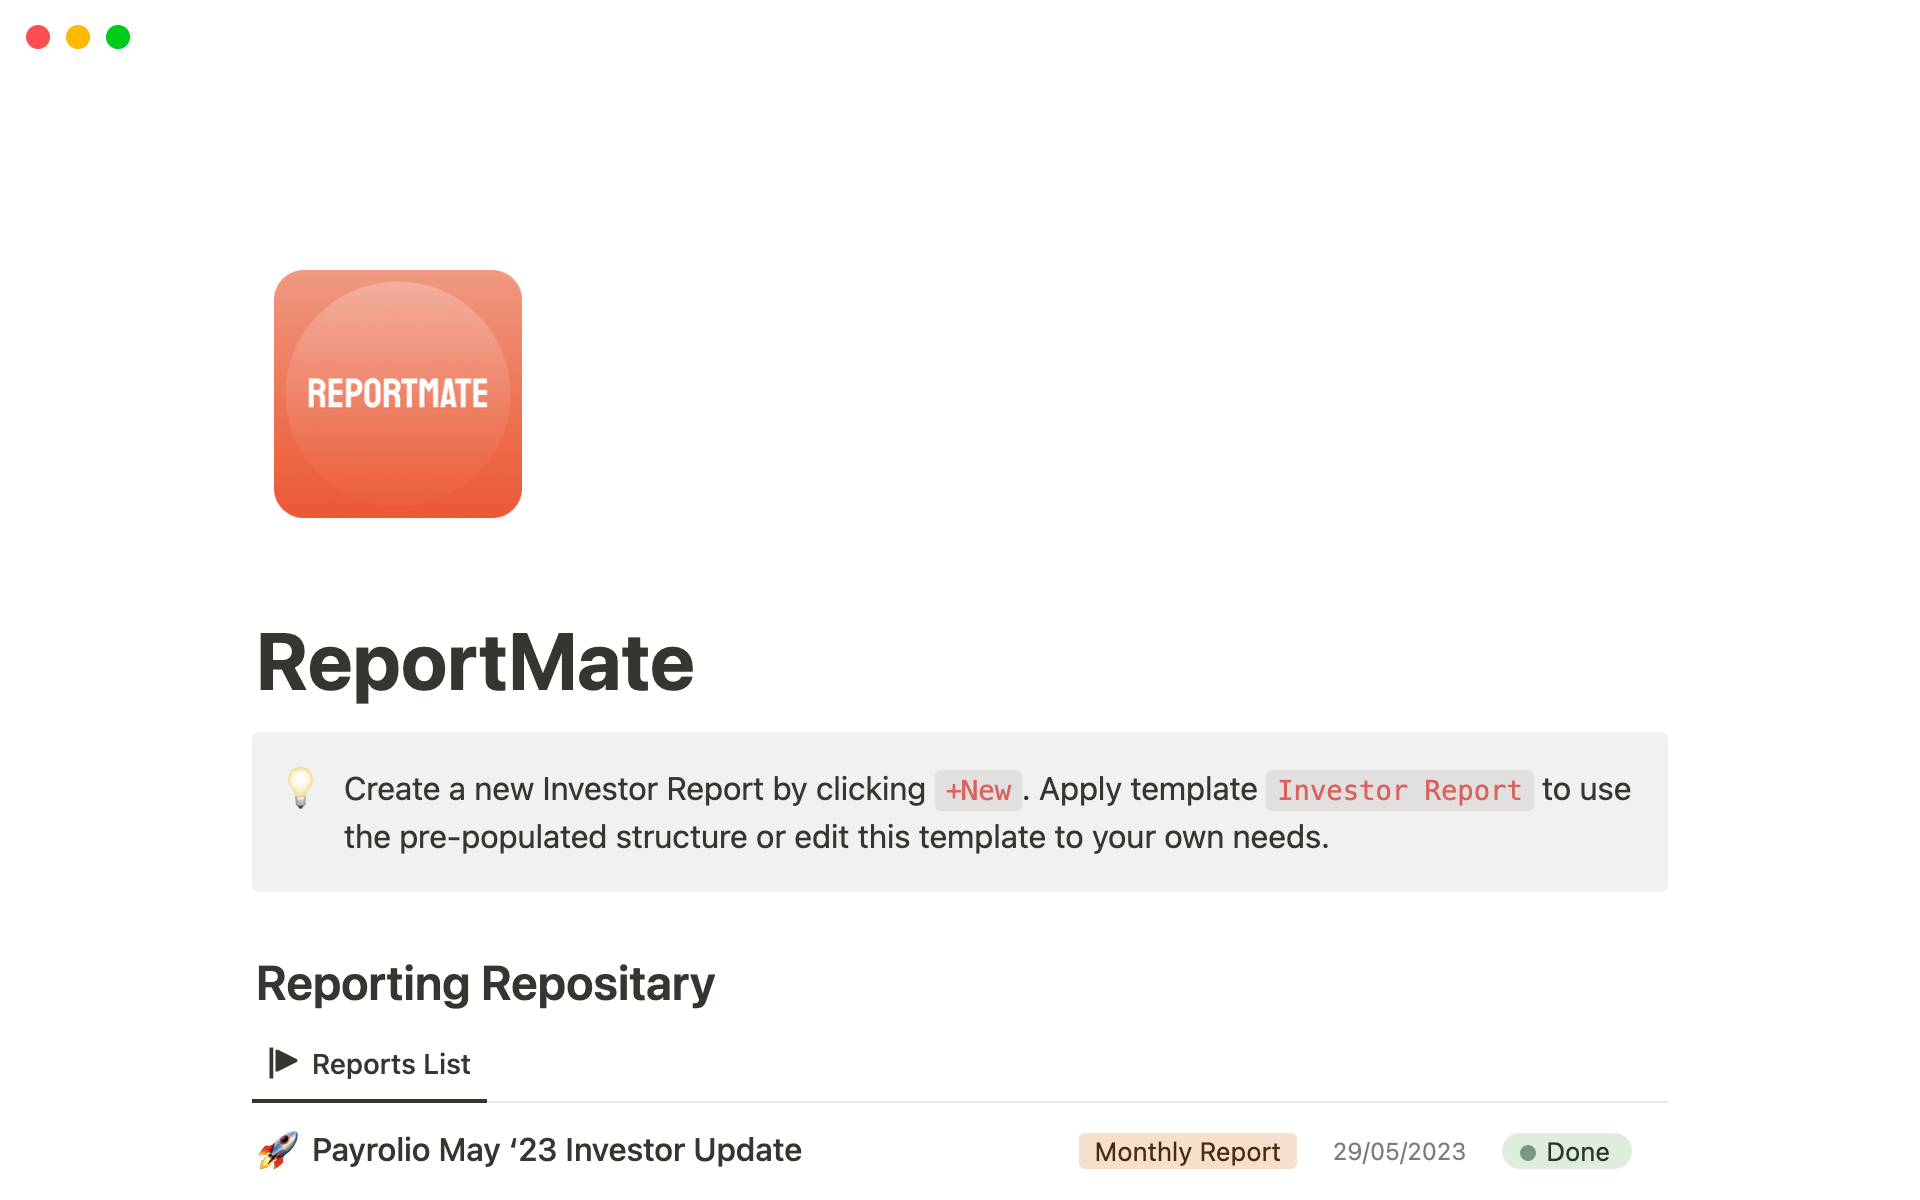 ReportMate is an easy to use solution template for any startup to write and manage regular investor updates